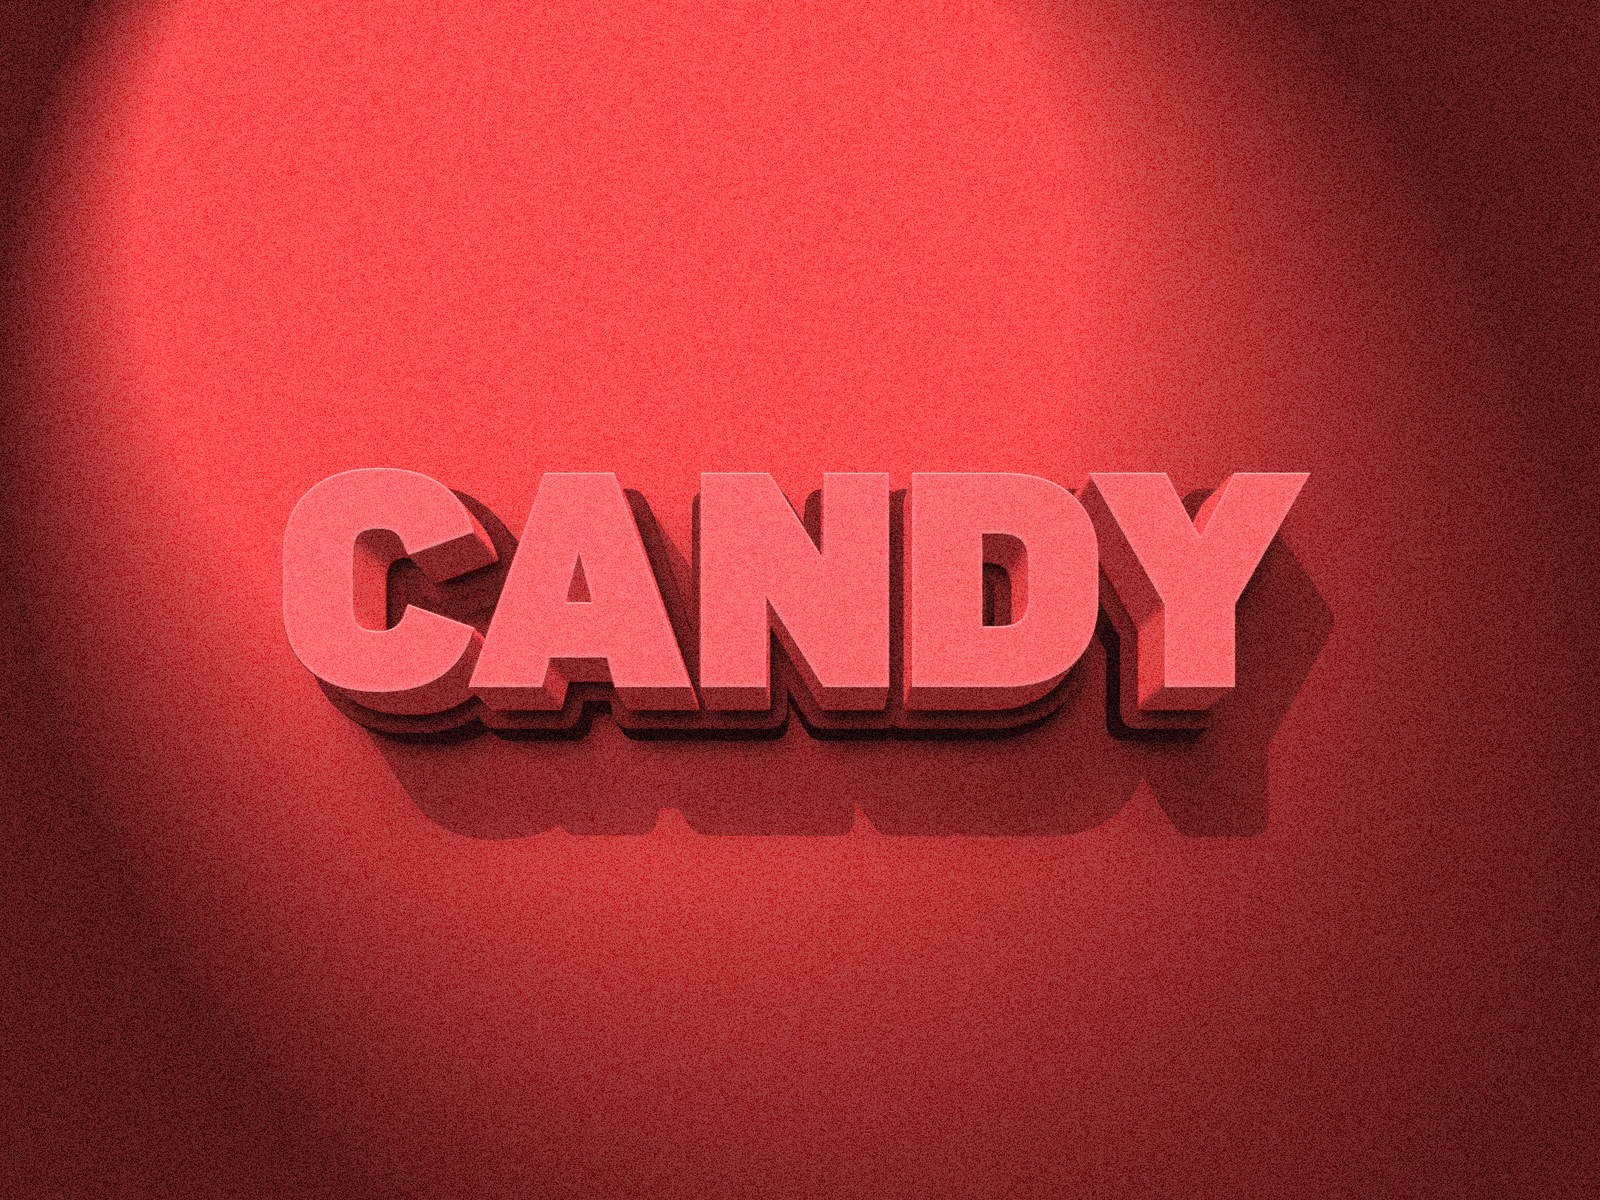 3d-text-photoshop-layer-style-in-the-oven-by-moh-d-m-khatib-on-dribbble